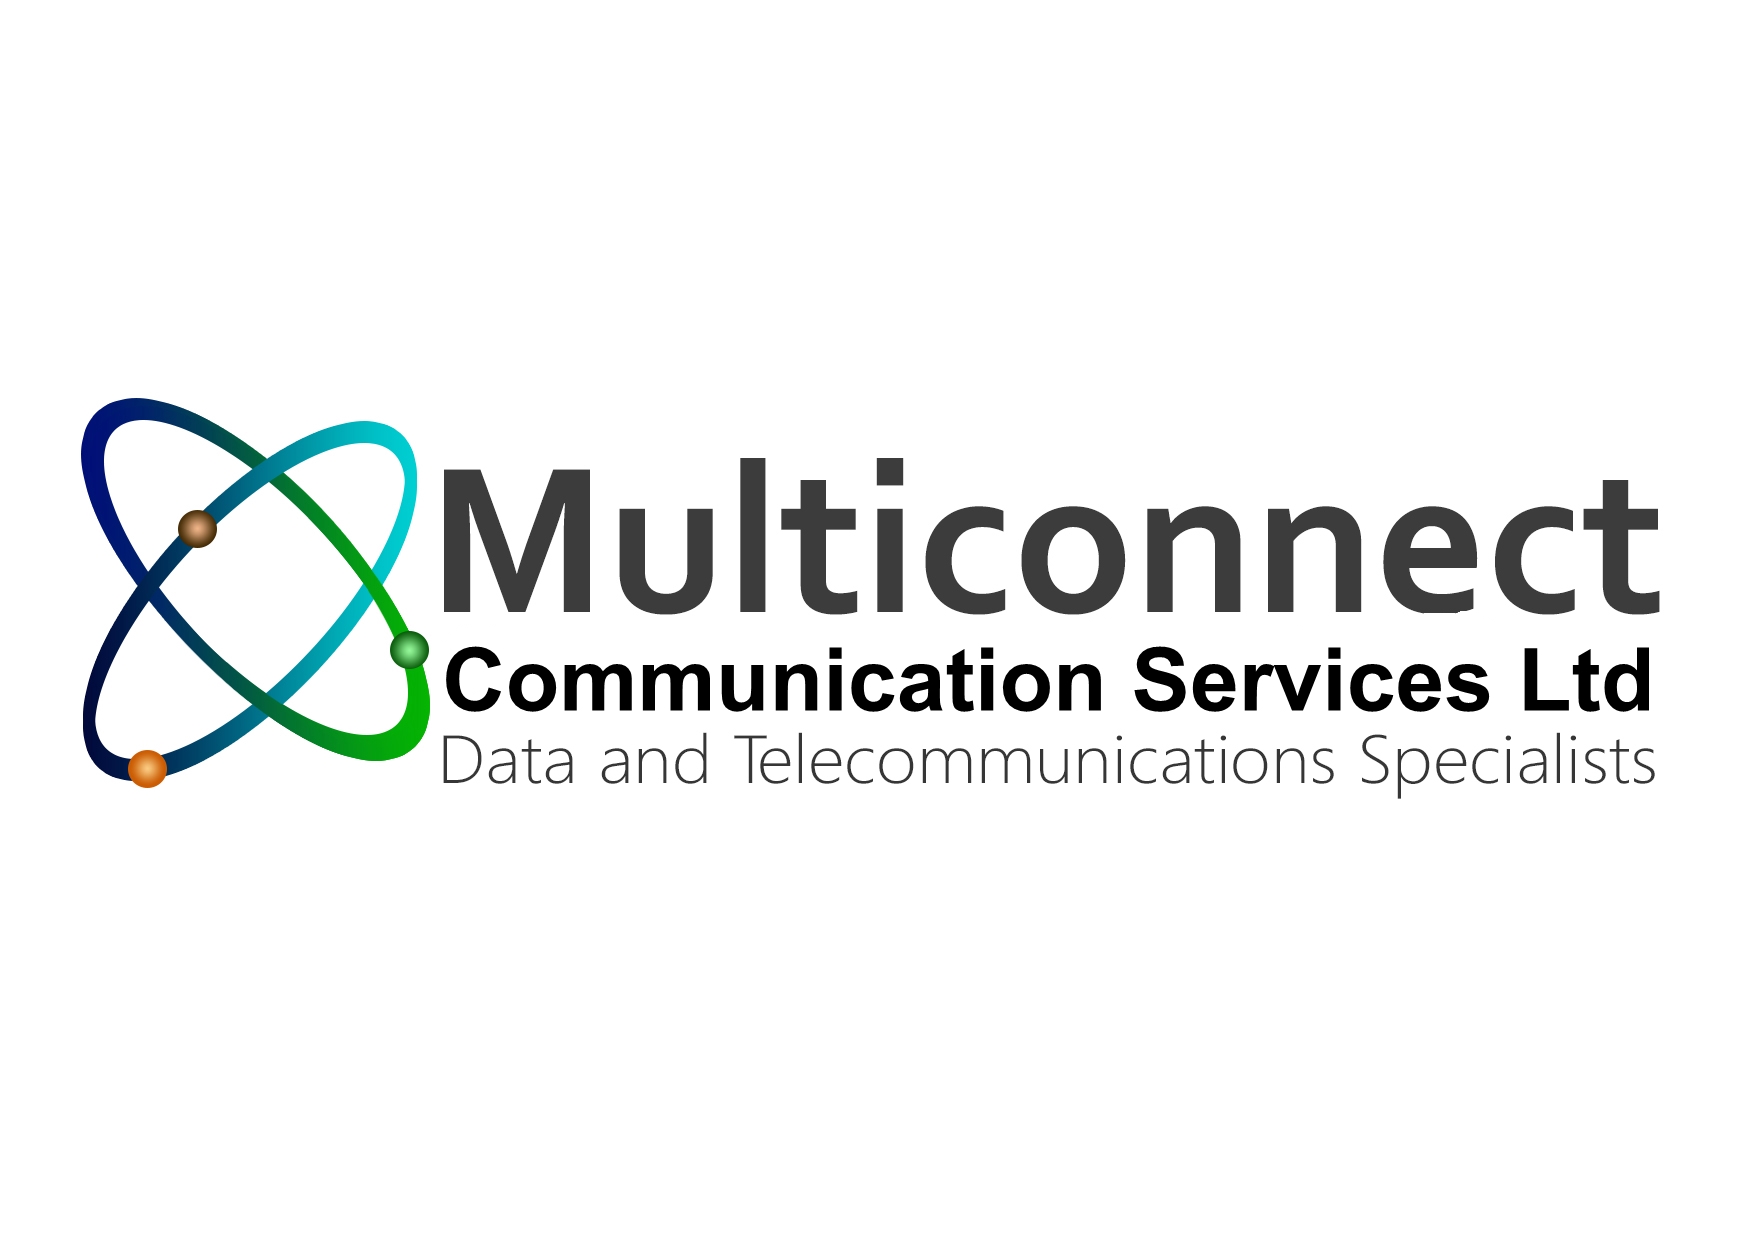 New sponsorship deal announced with Multiconnect Communication Services